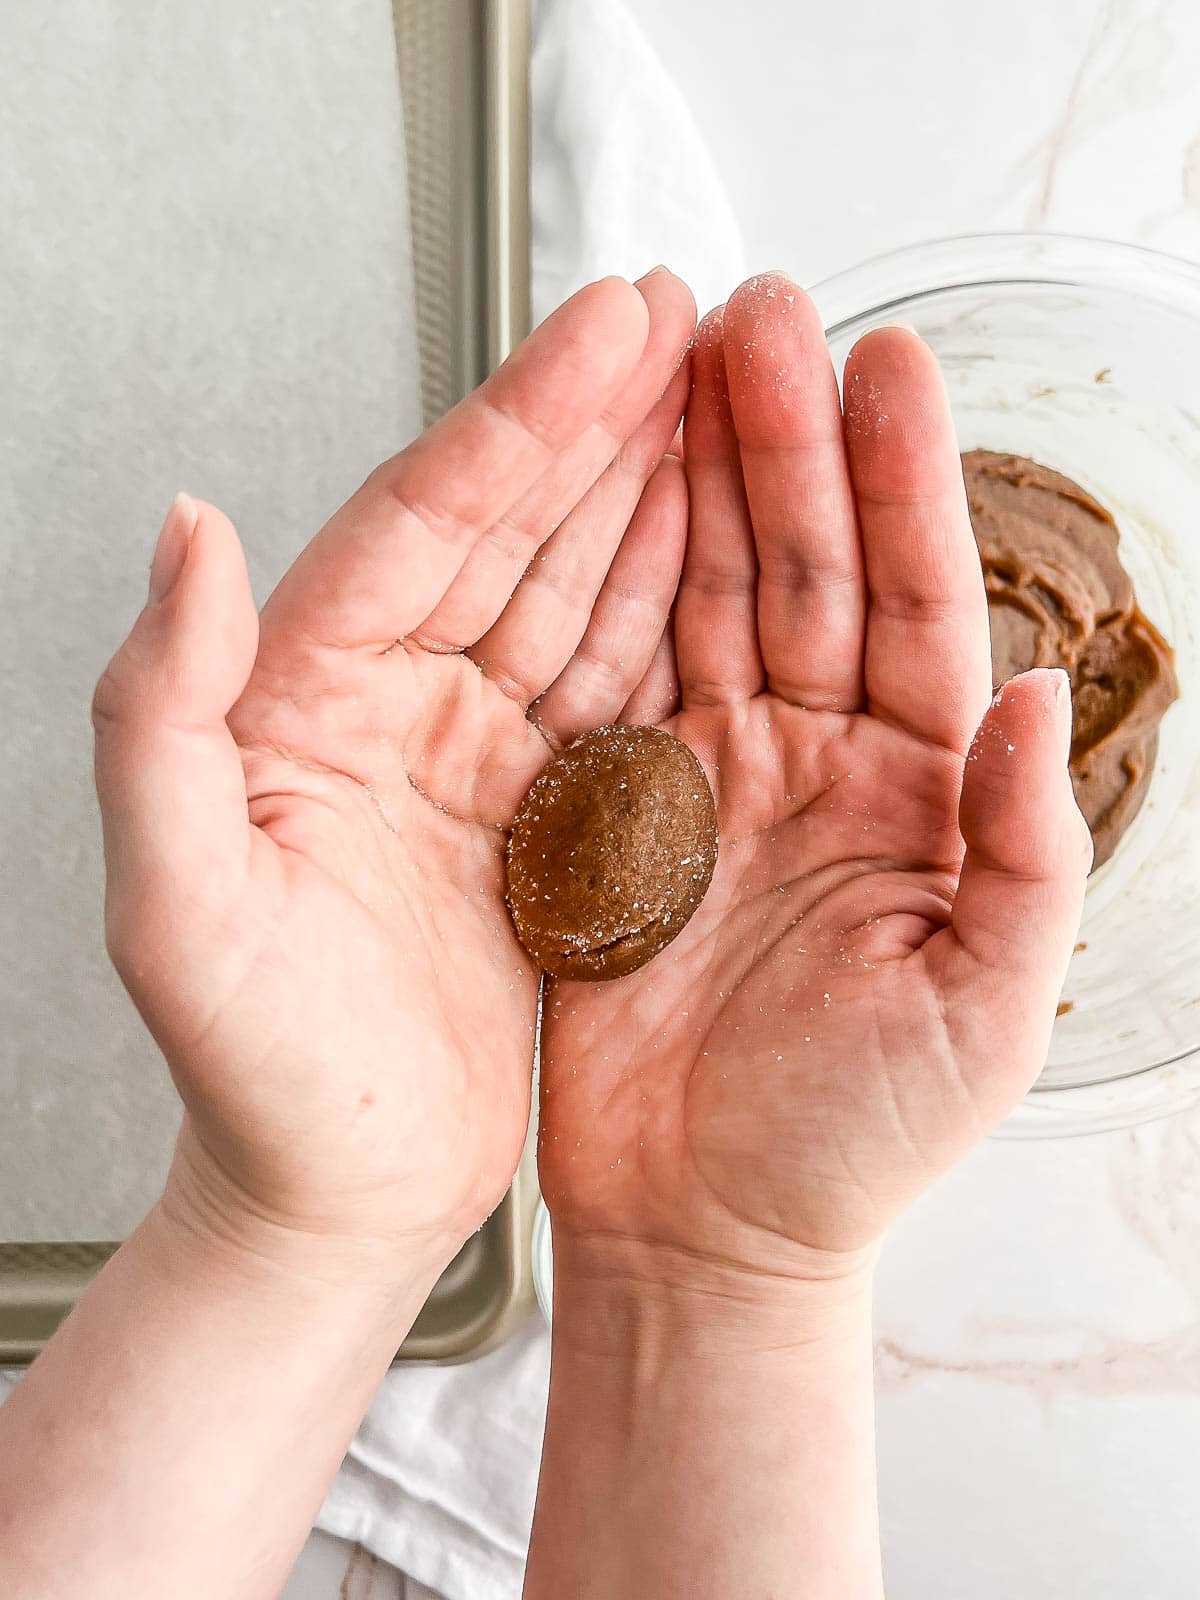 Gingersnap dough ball in palms of two hands.